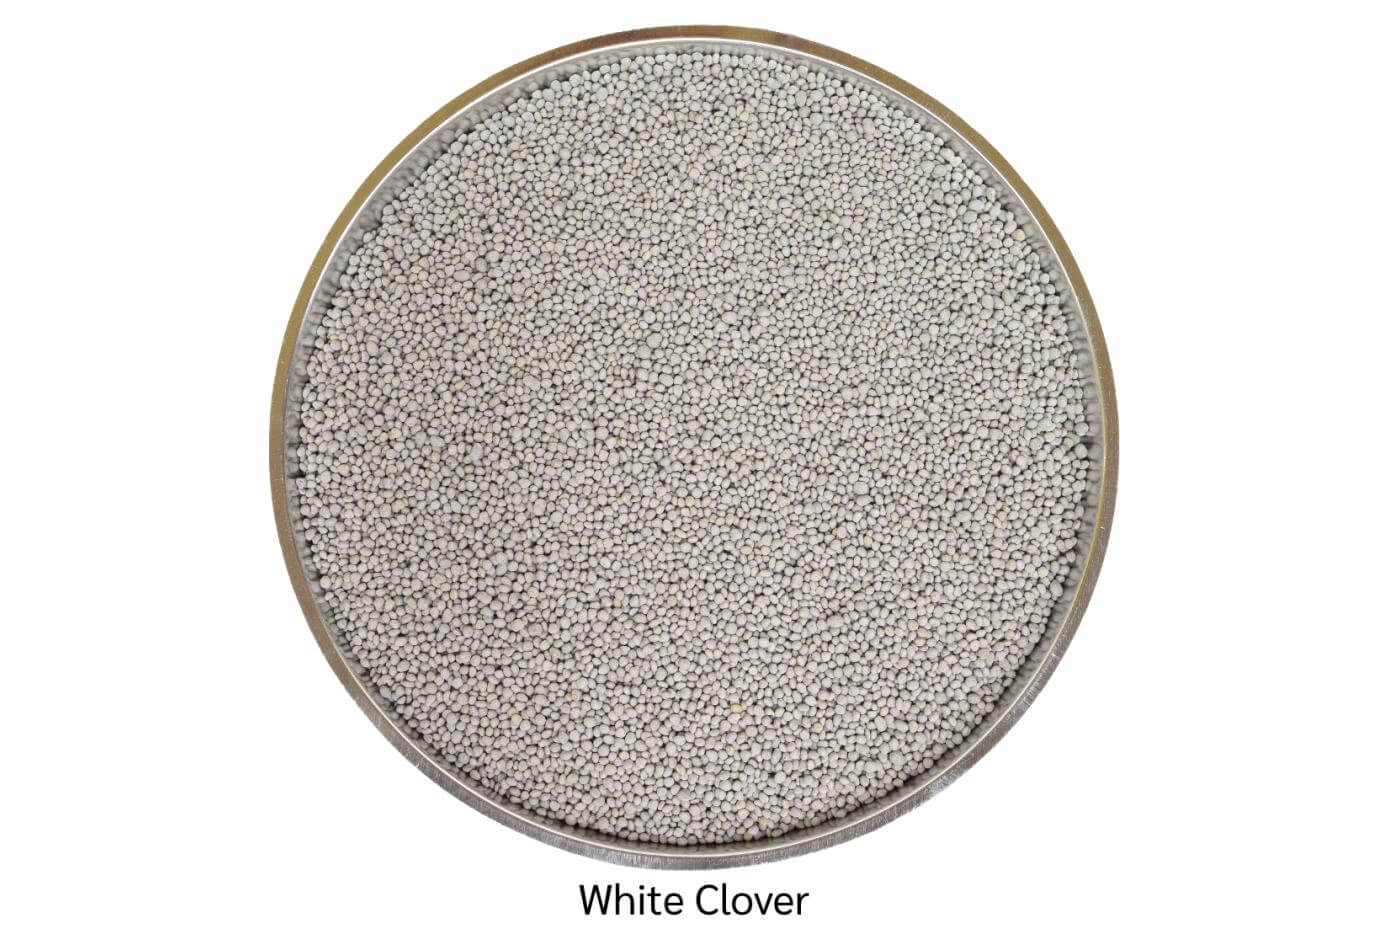 Coated white clover seed